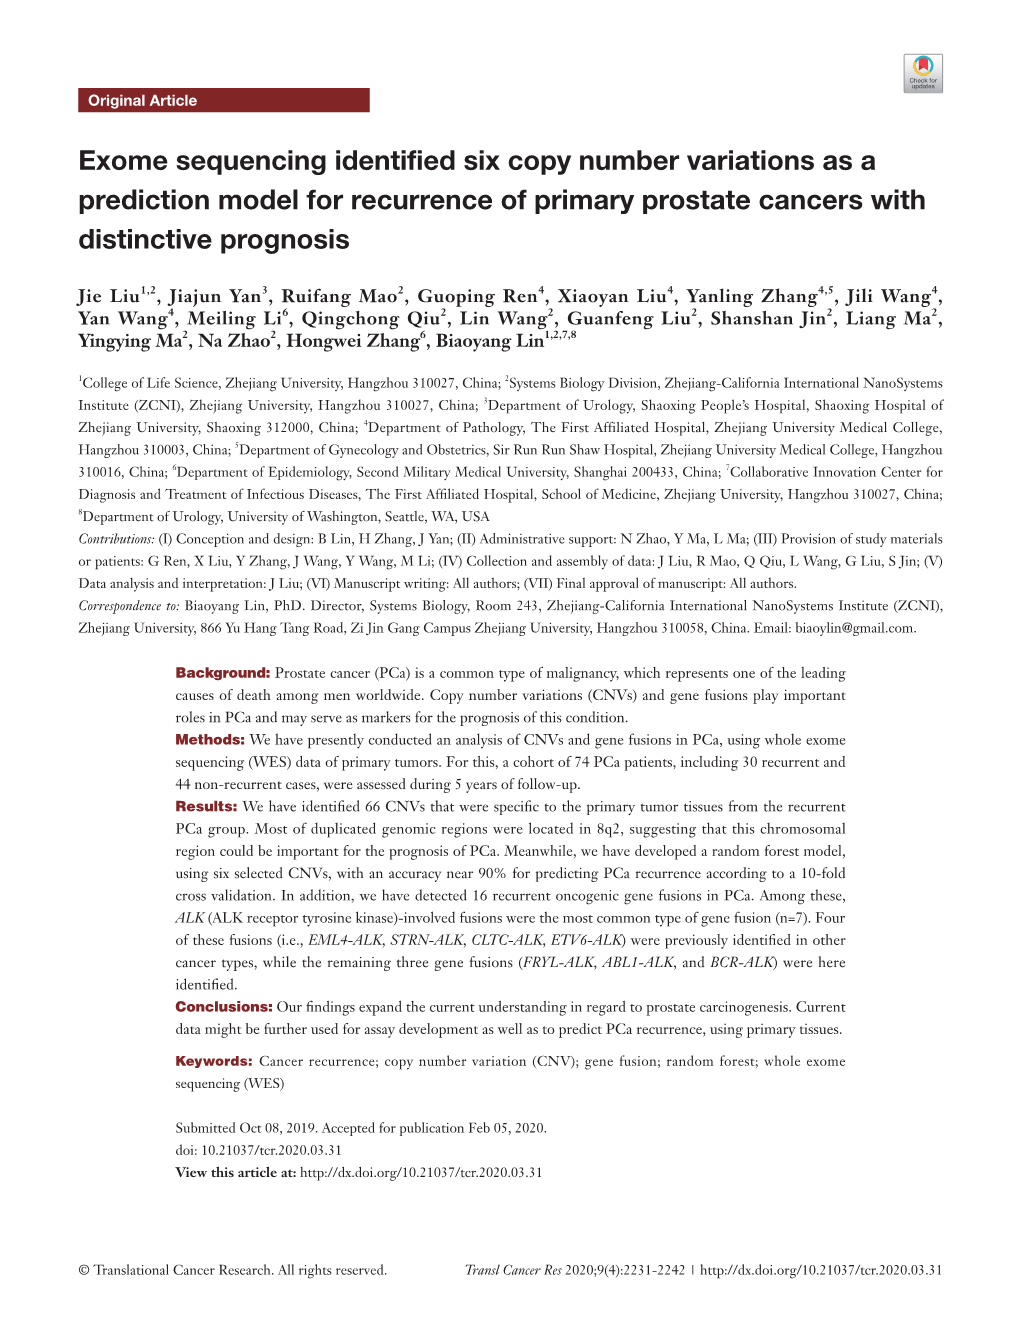 Exome Sequencing Identified Six Copy Number Variations As a Prediction Model for Recurrence of Primary Prostate Cancers with Distinctive Prognosis